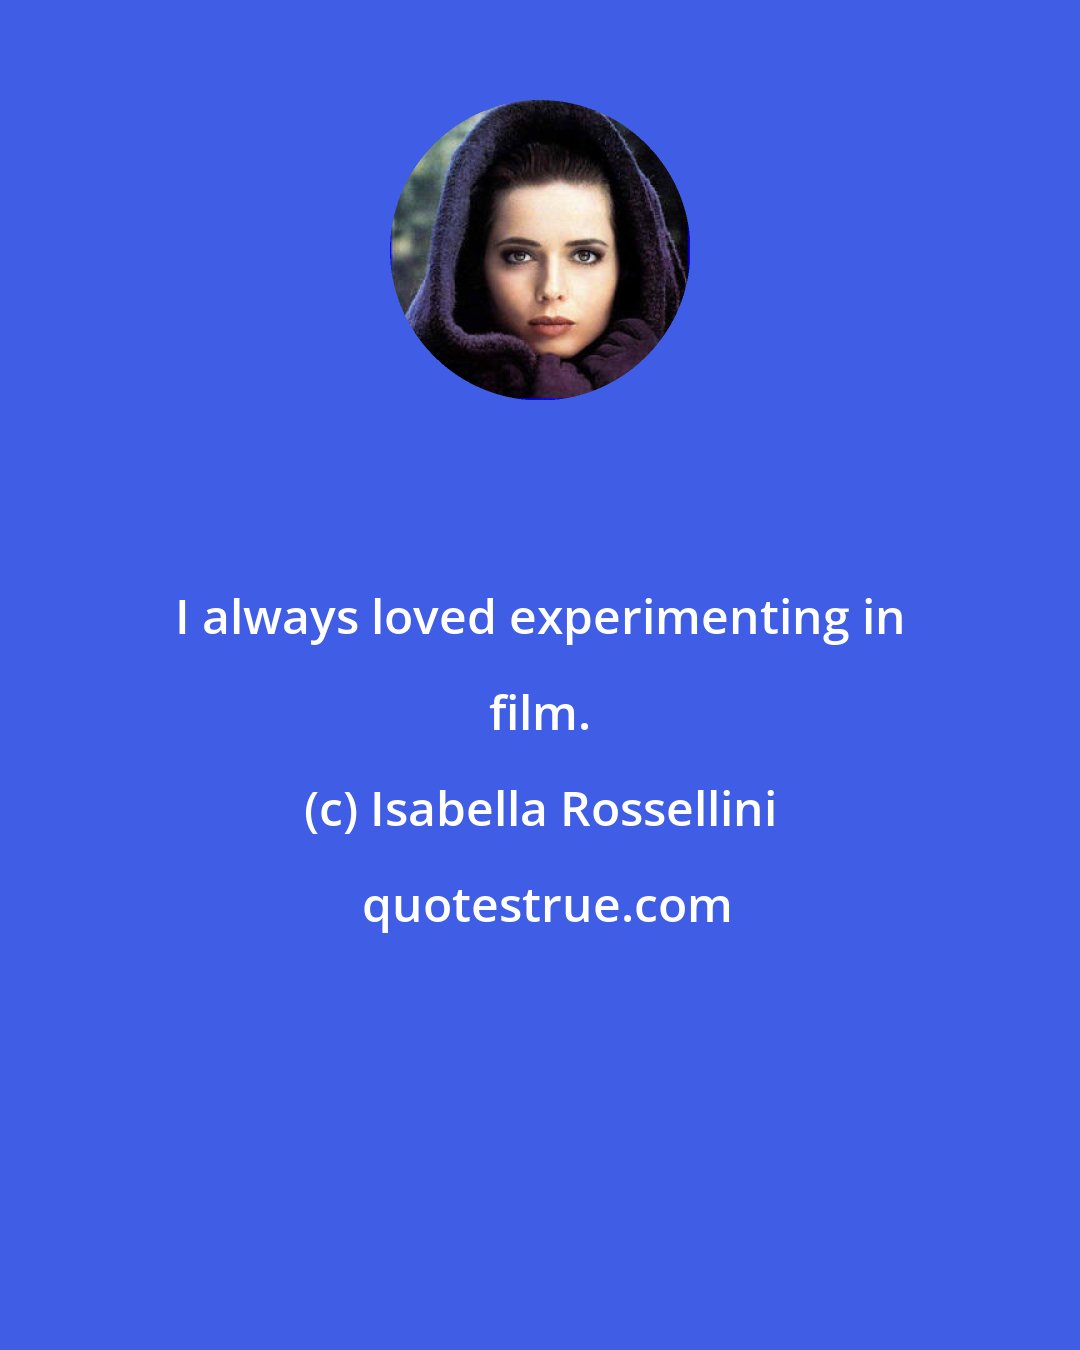 Isabella Rossellini: I always loved experimenting in film.